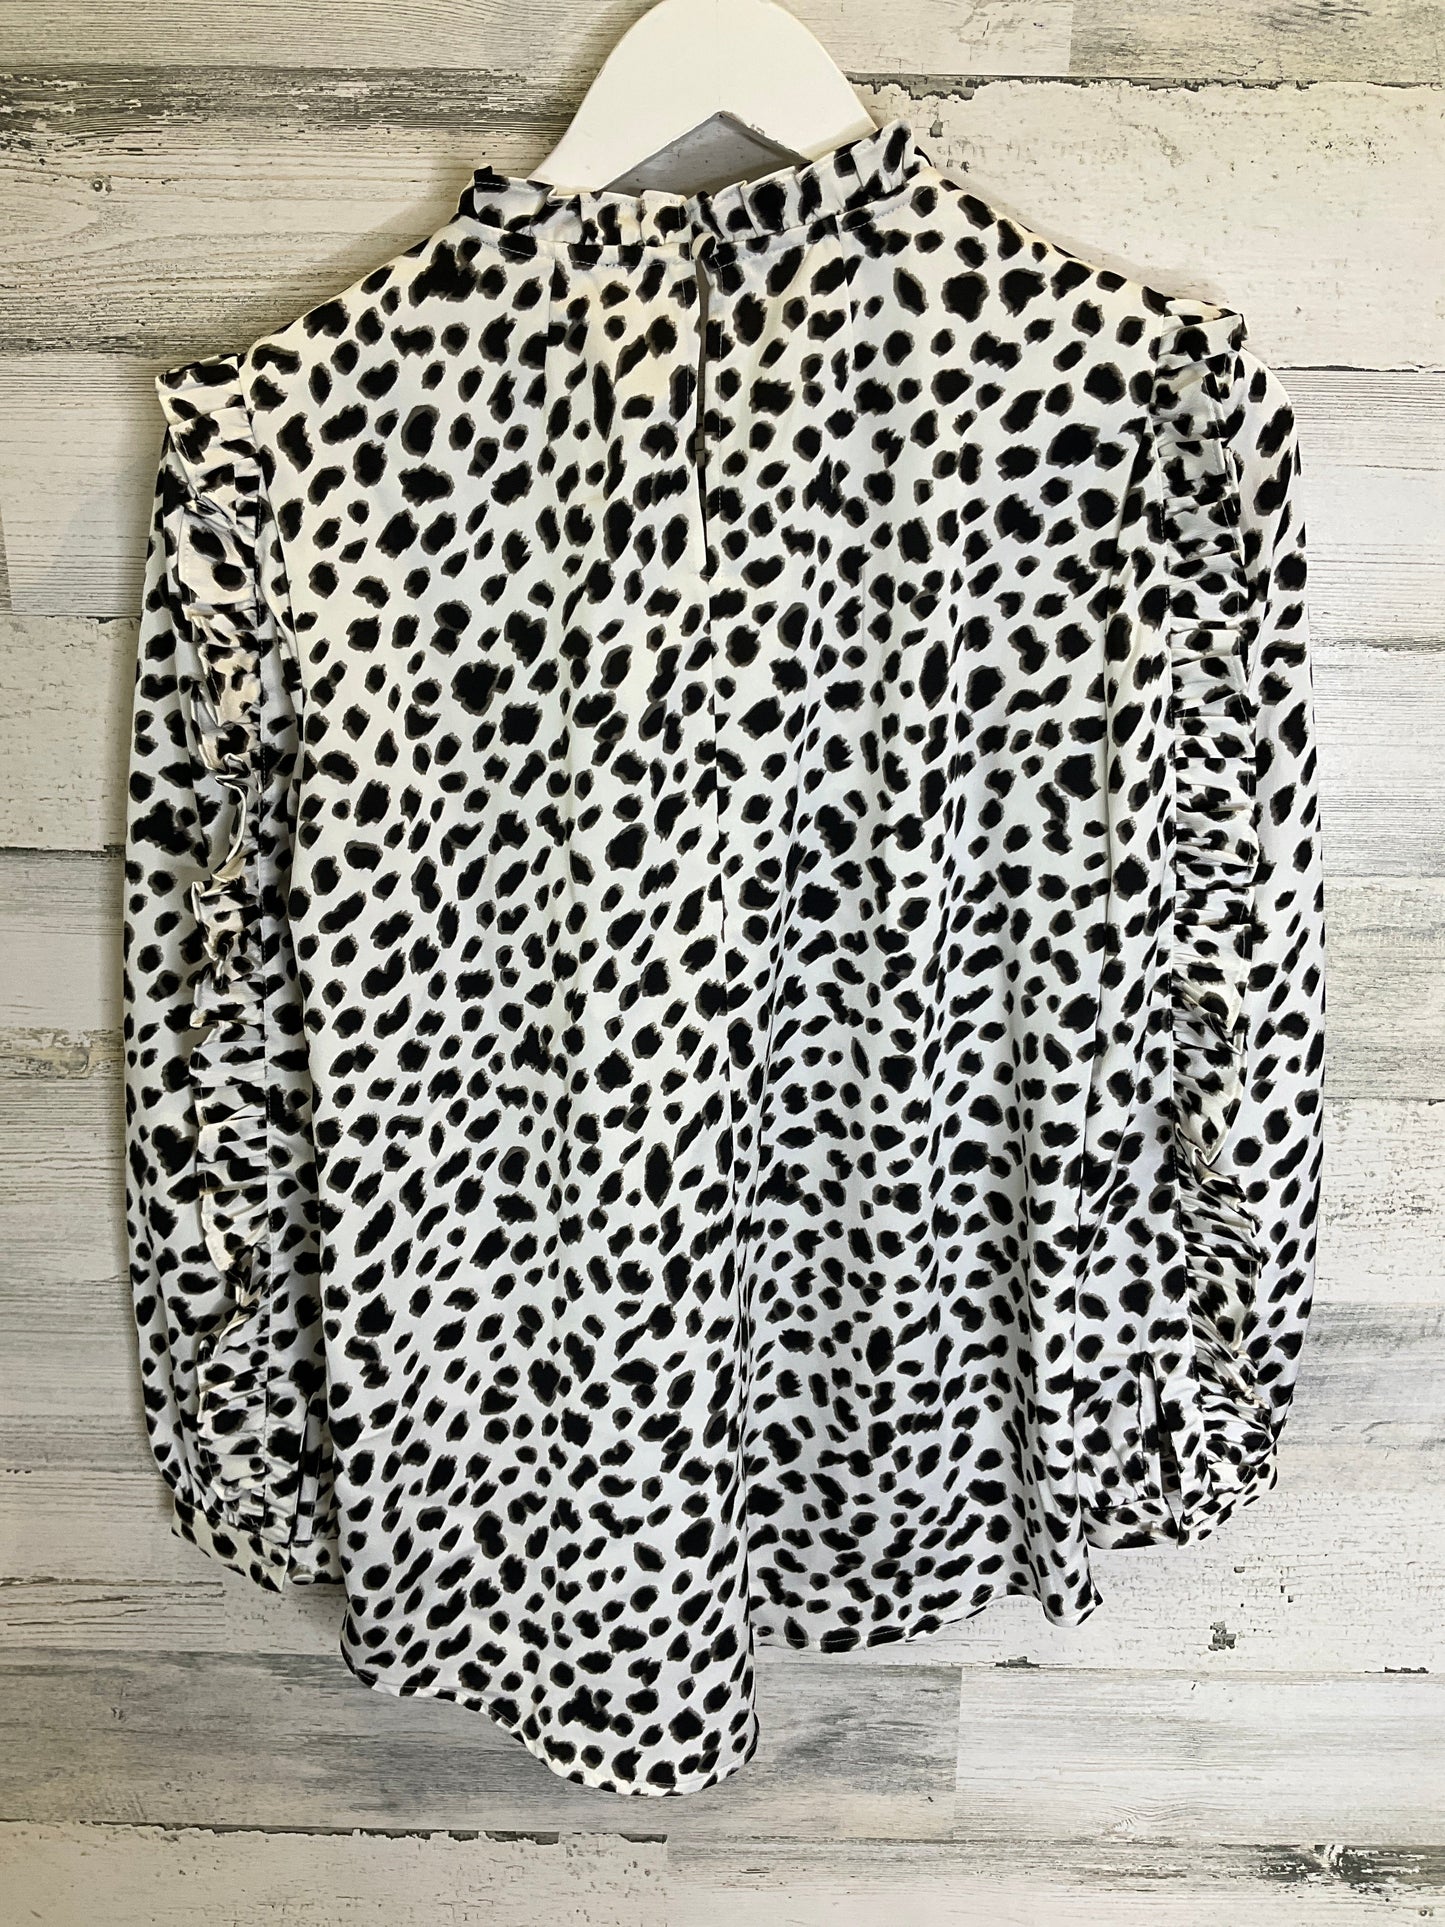 Animal Print Top Long Sleeve Clothes Mentor, Size Xs